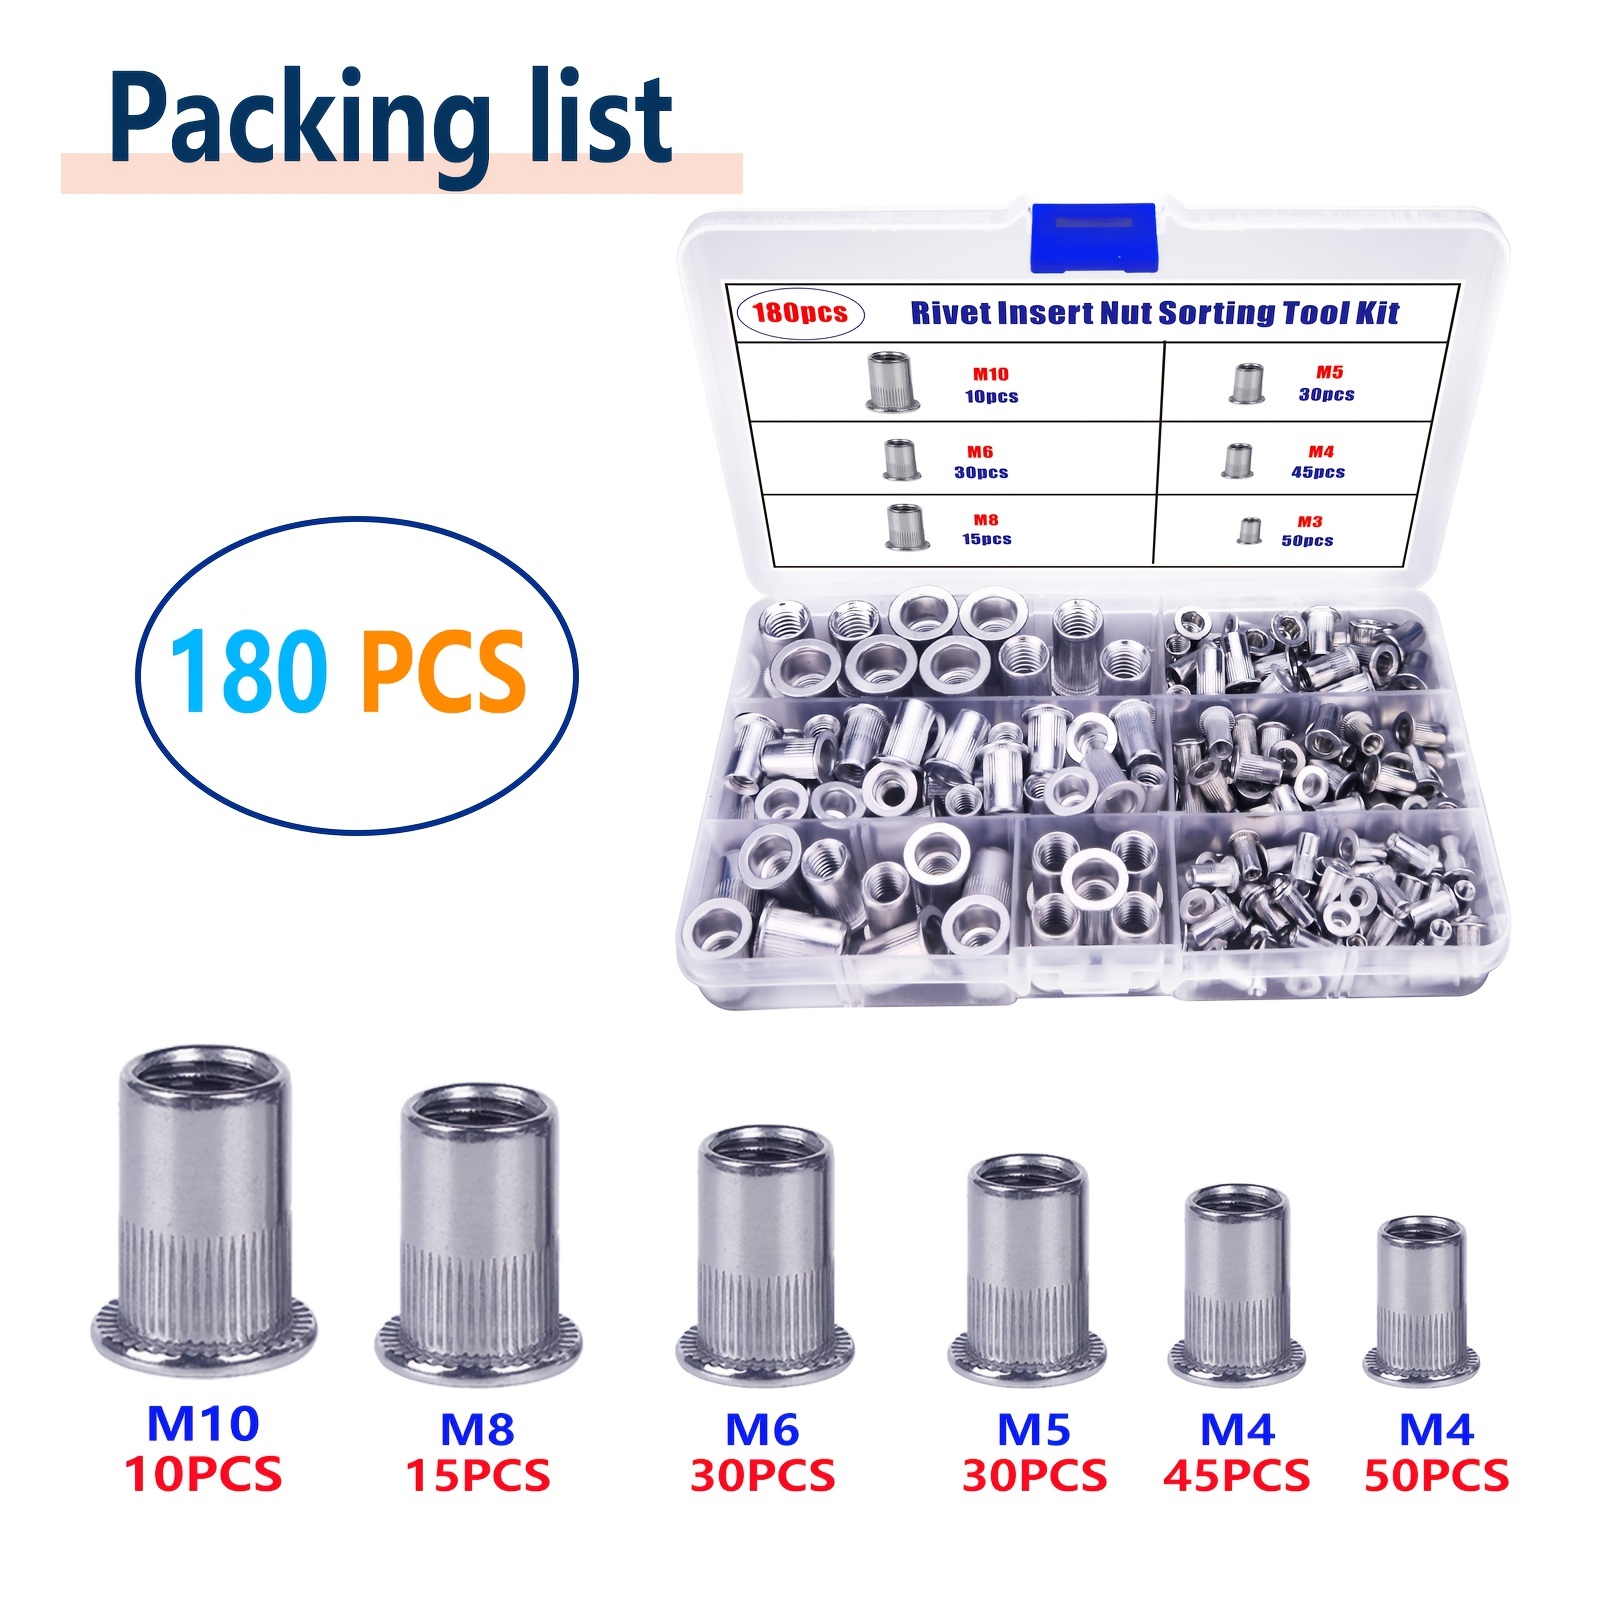 50Pcs Four Claw Nuts Fitments Threaded Insert Carbon Steel Nonslip